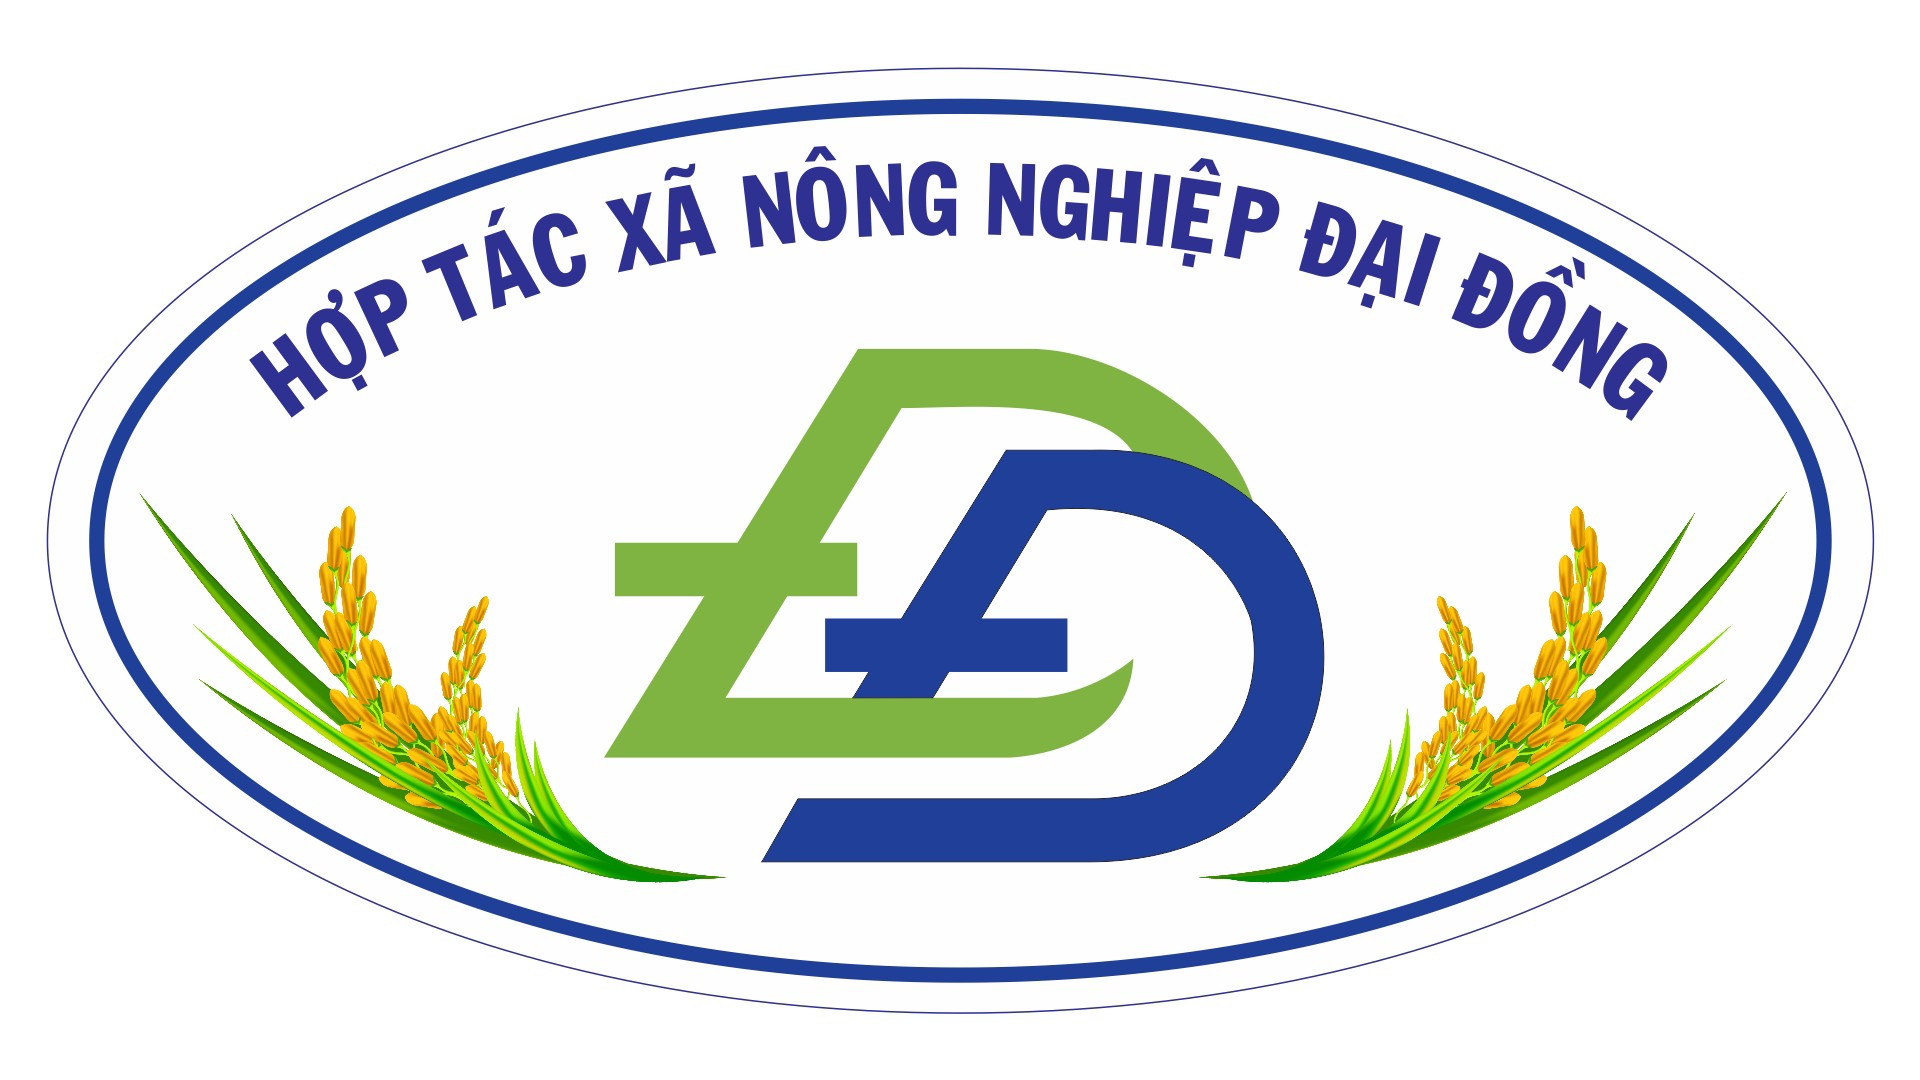 Dai Dong Agricultural Cooperative